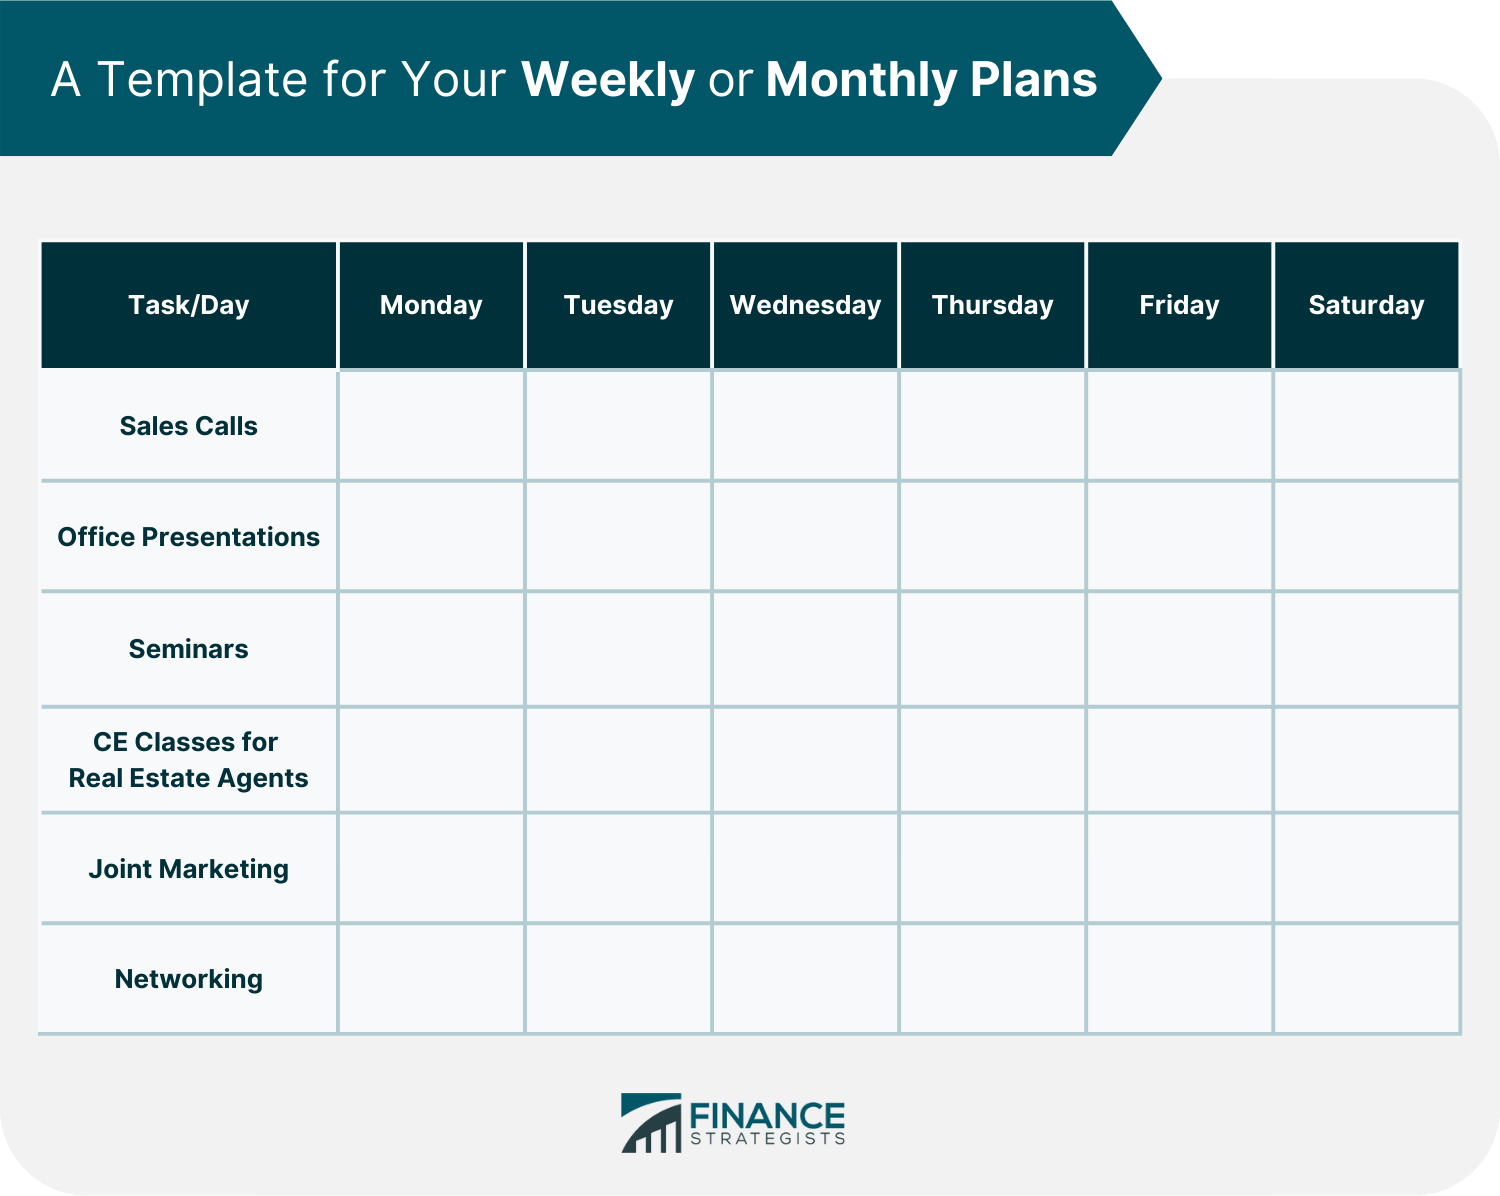 A Template for Your Weekly or Monthly Plans